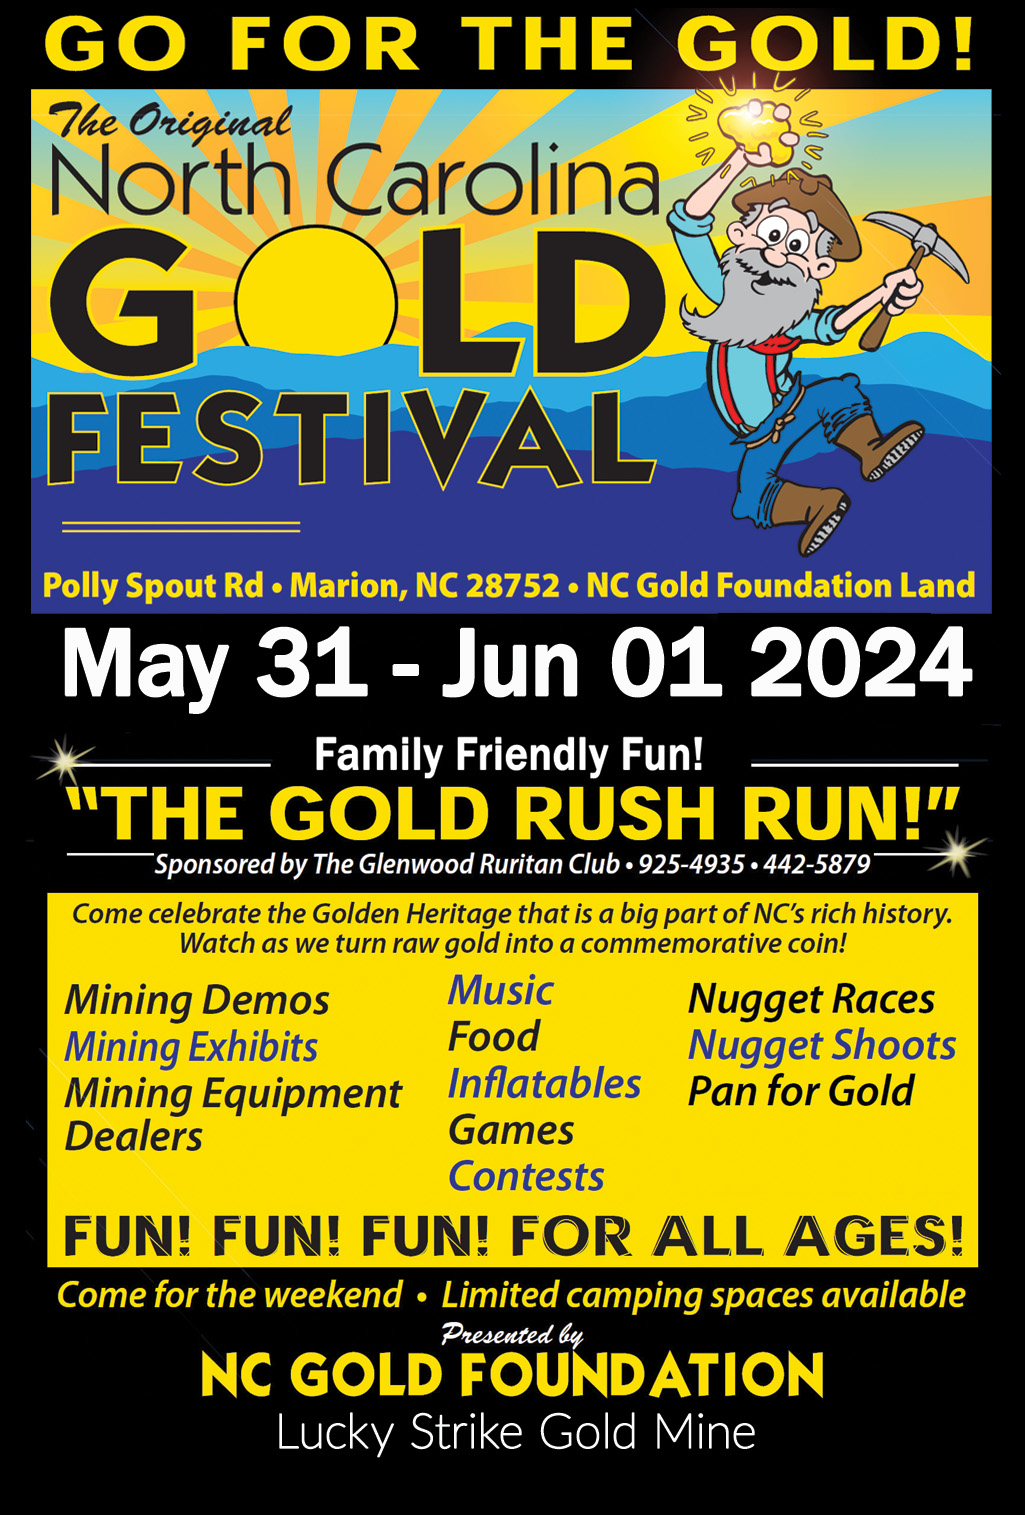 2023 NC Gold Festival, June 2nd and 3rd 2023